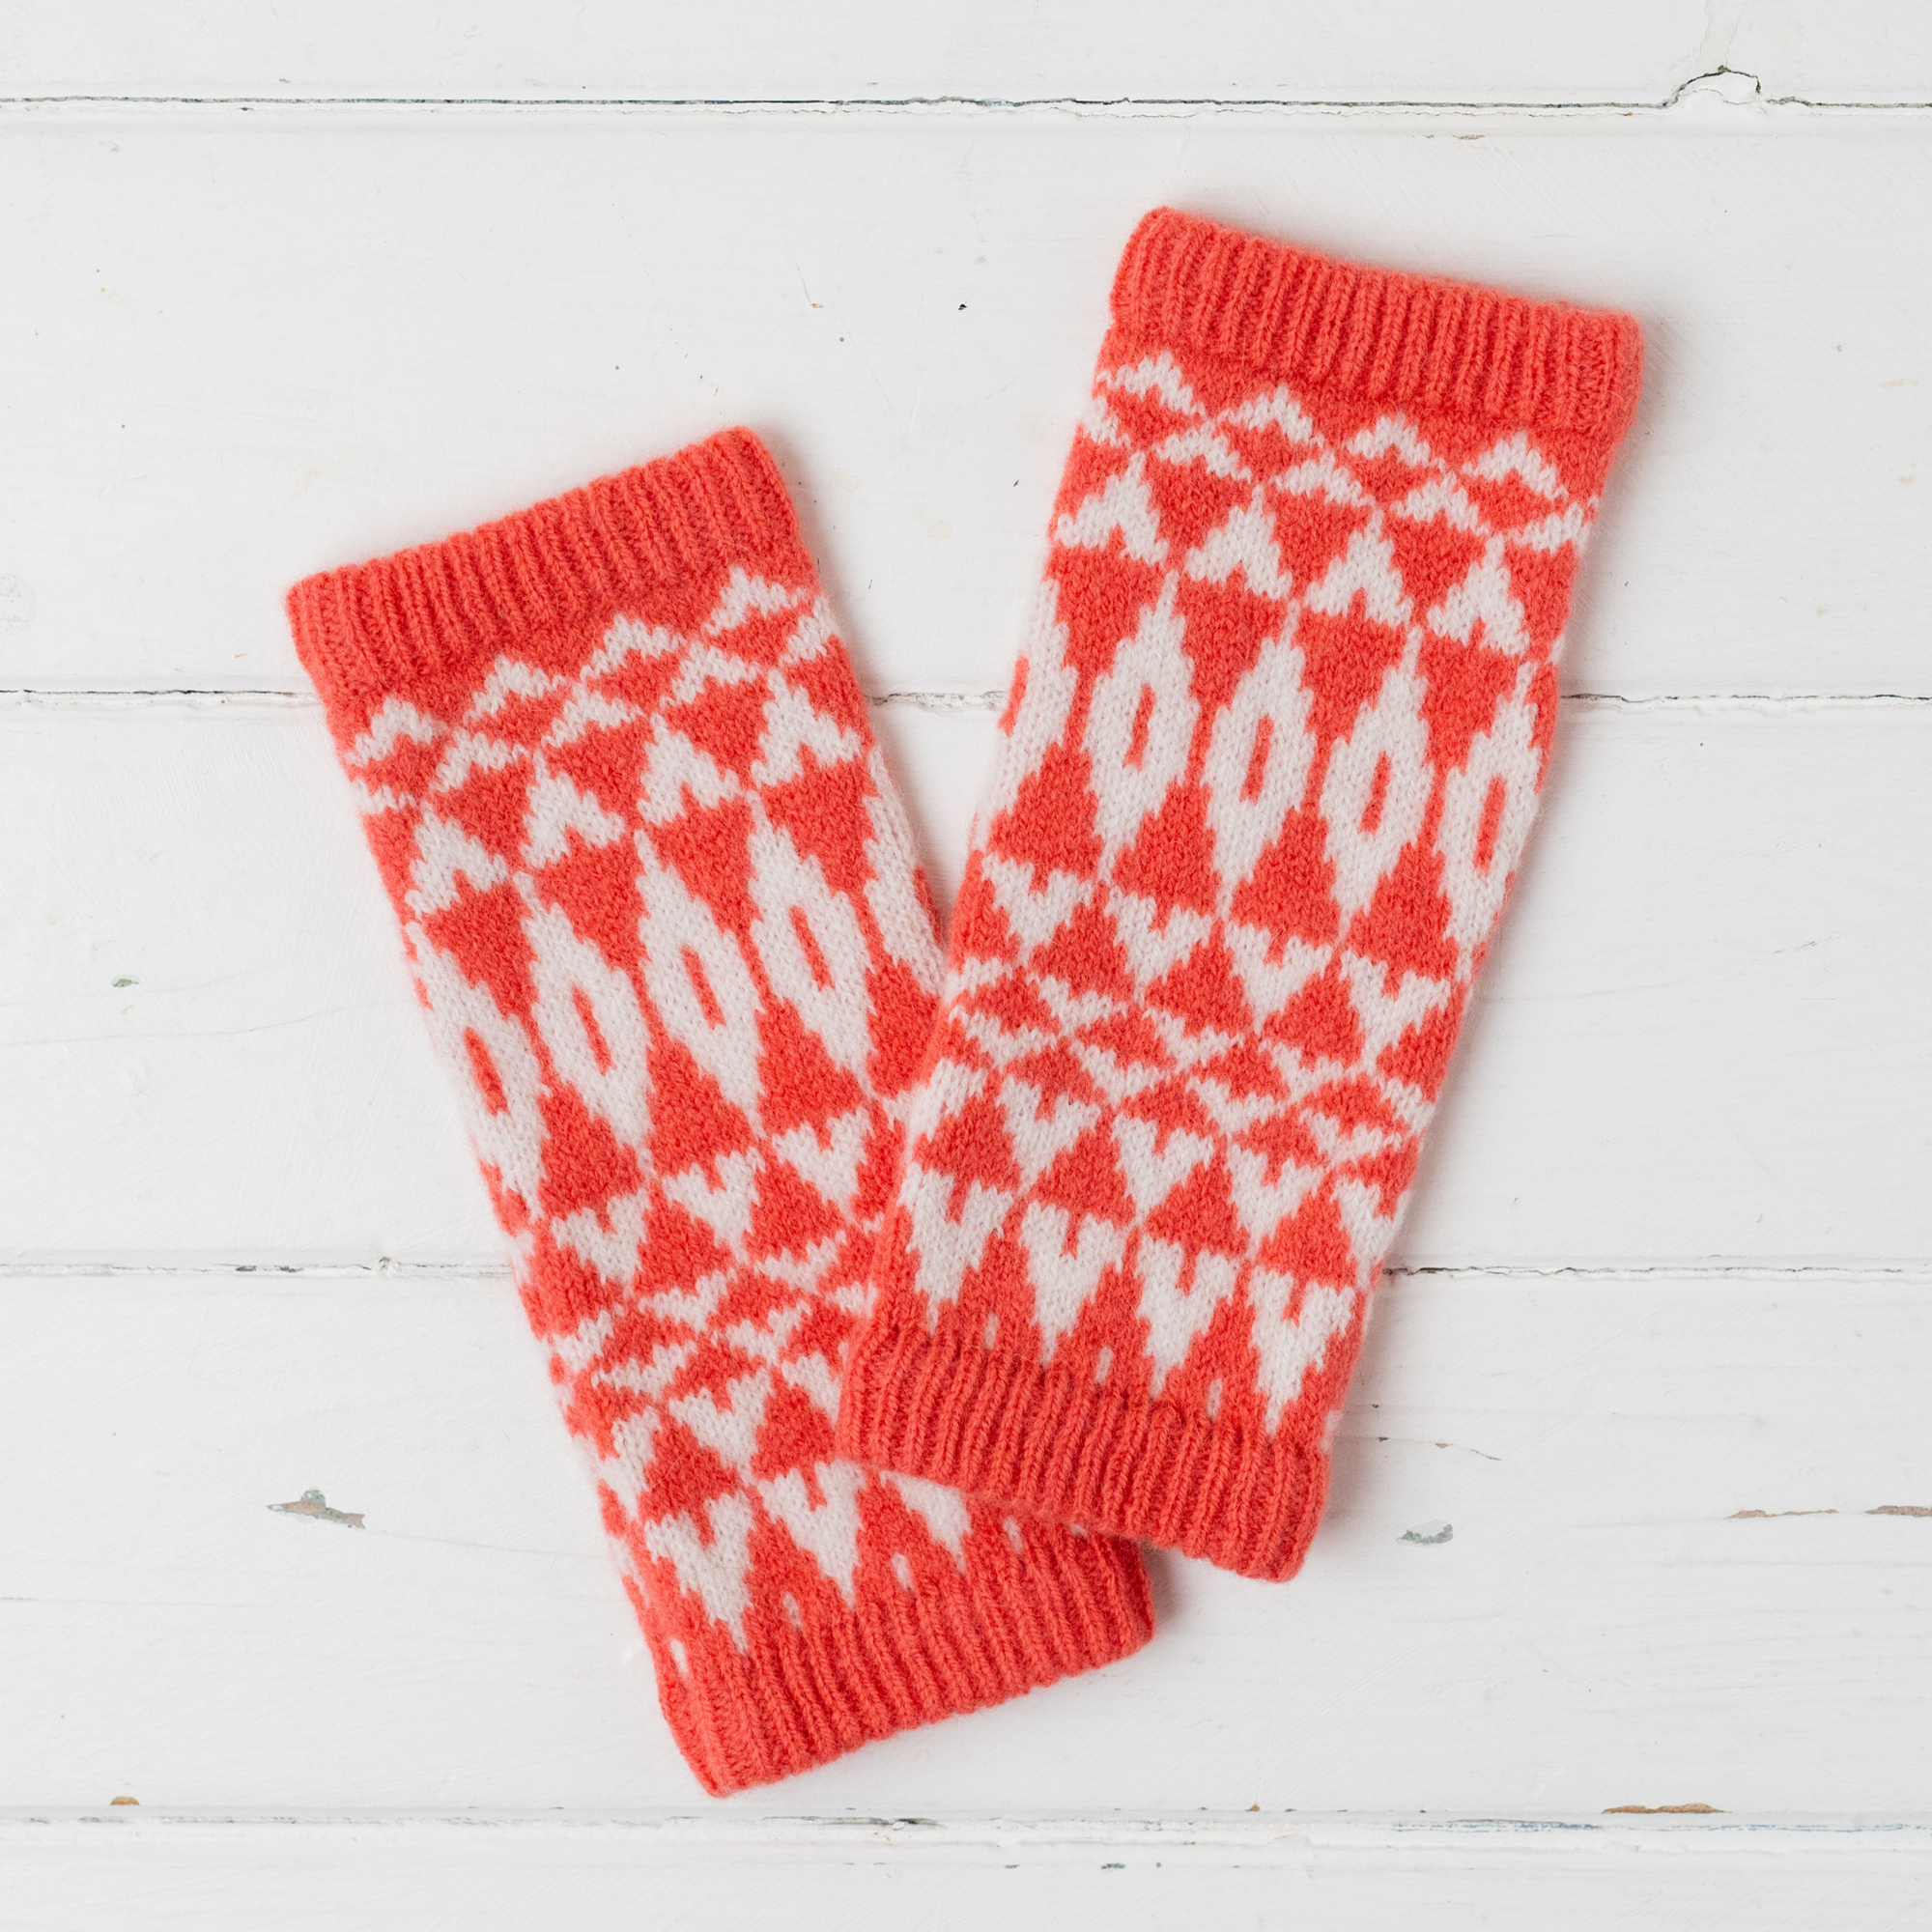 Mirror wrist warmers - coral and white (MADE TO ORDER)